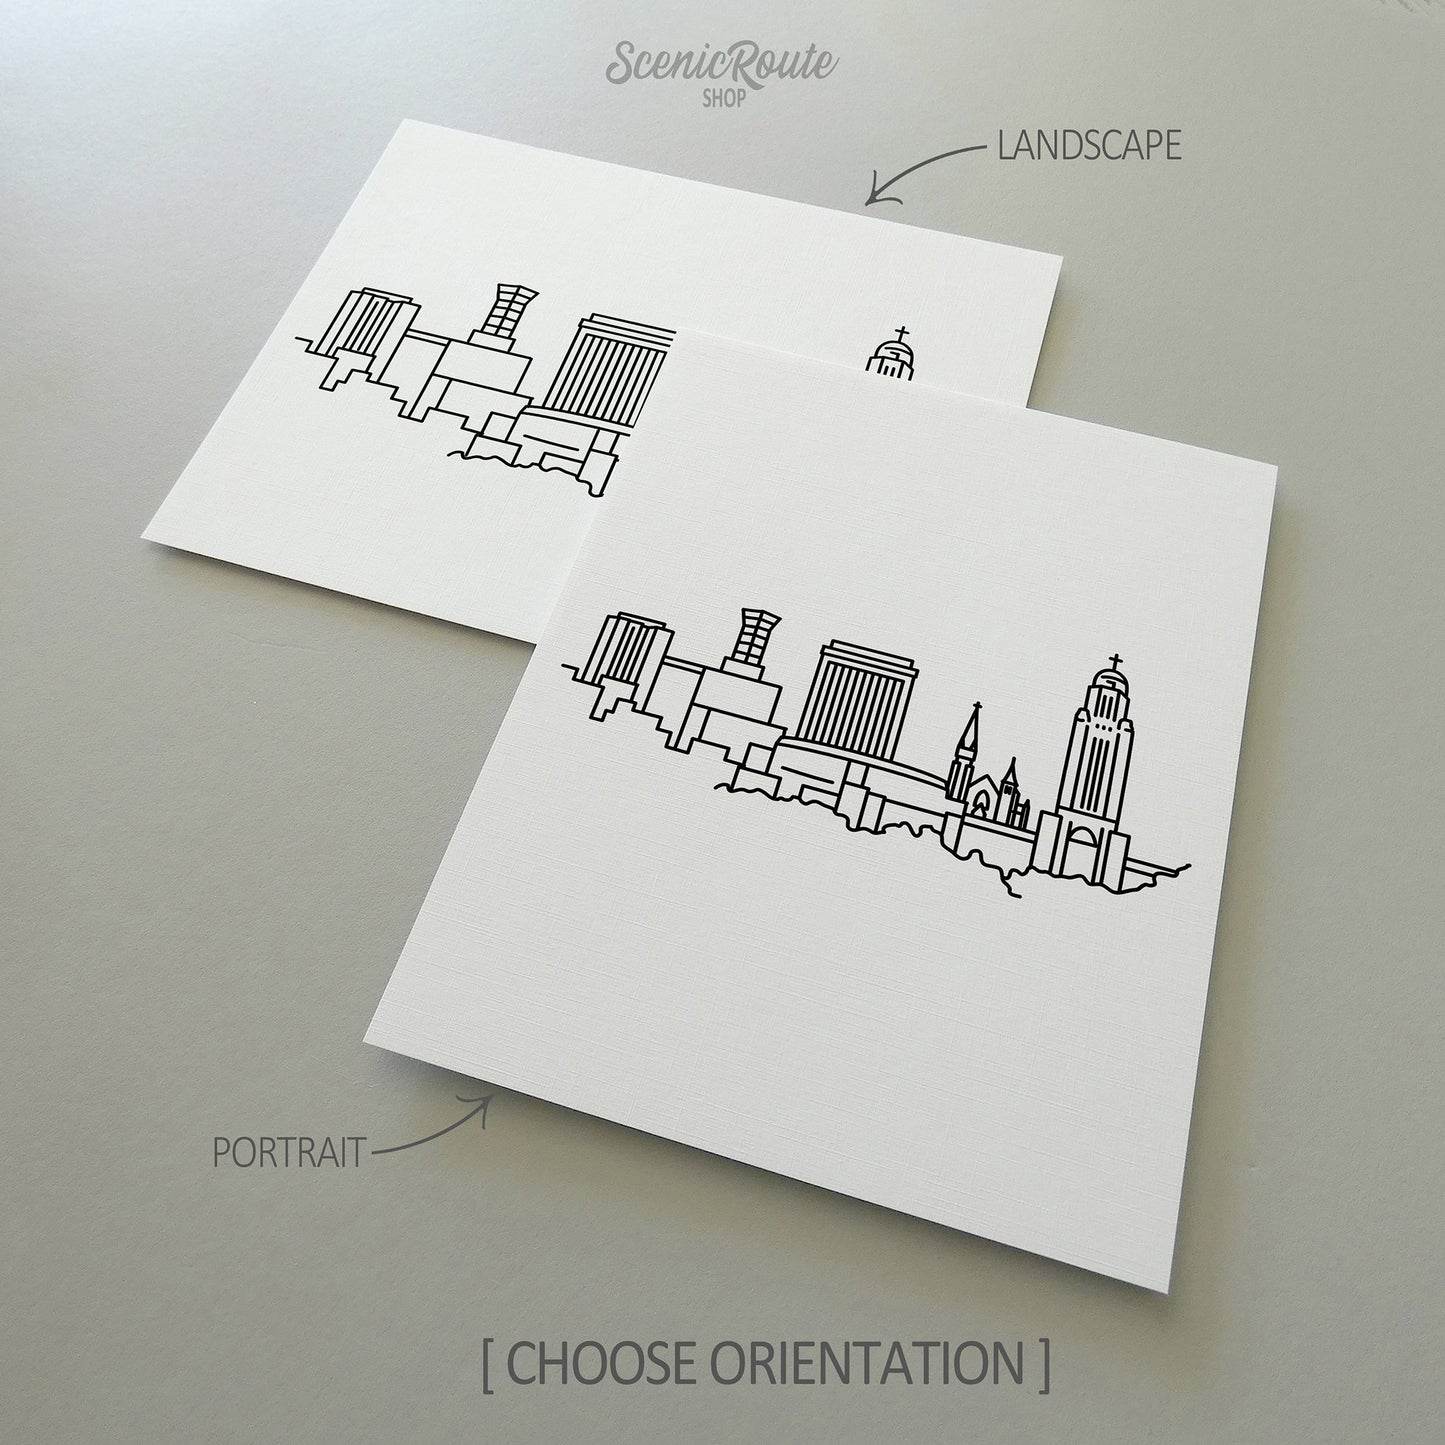 Two line art drawings of the Lincoln Skyline on white linen paper with a gray background.  The pieces are shown in portrait and landscape orientation for the available art print options.